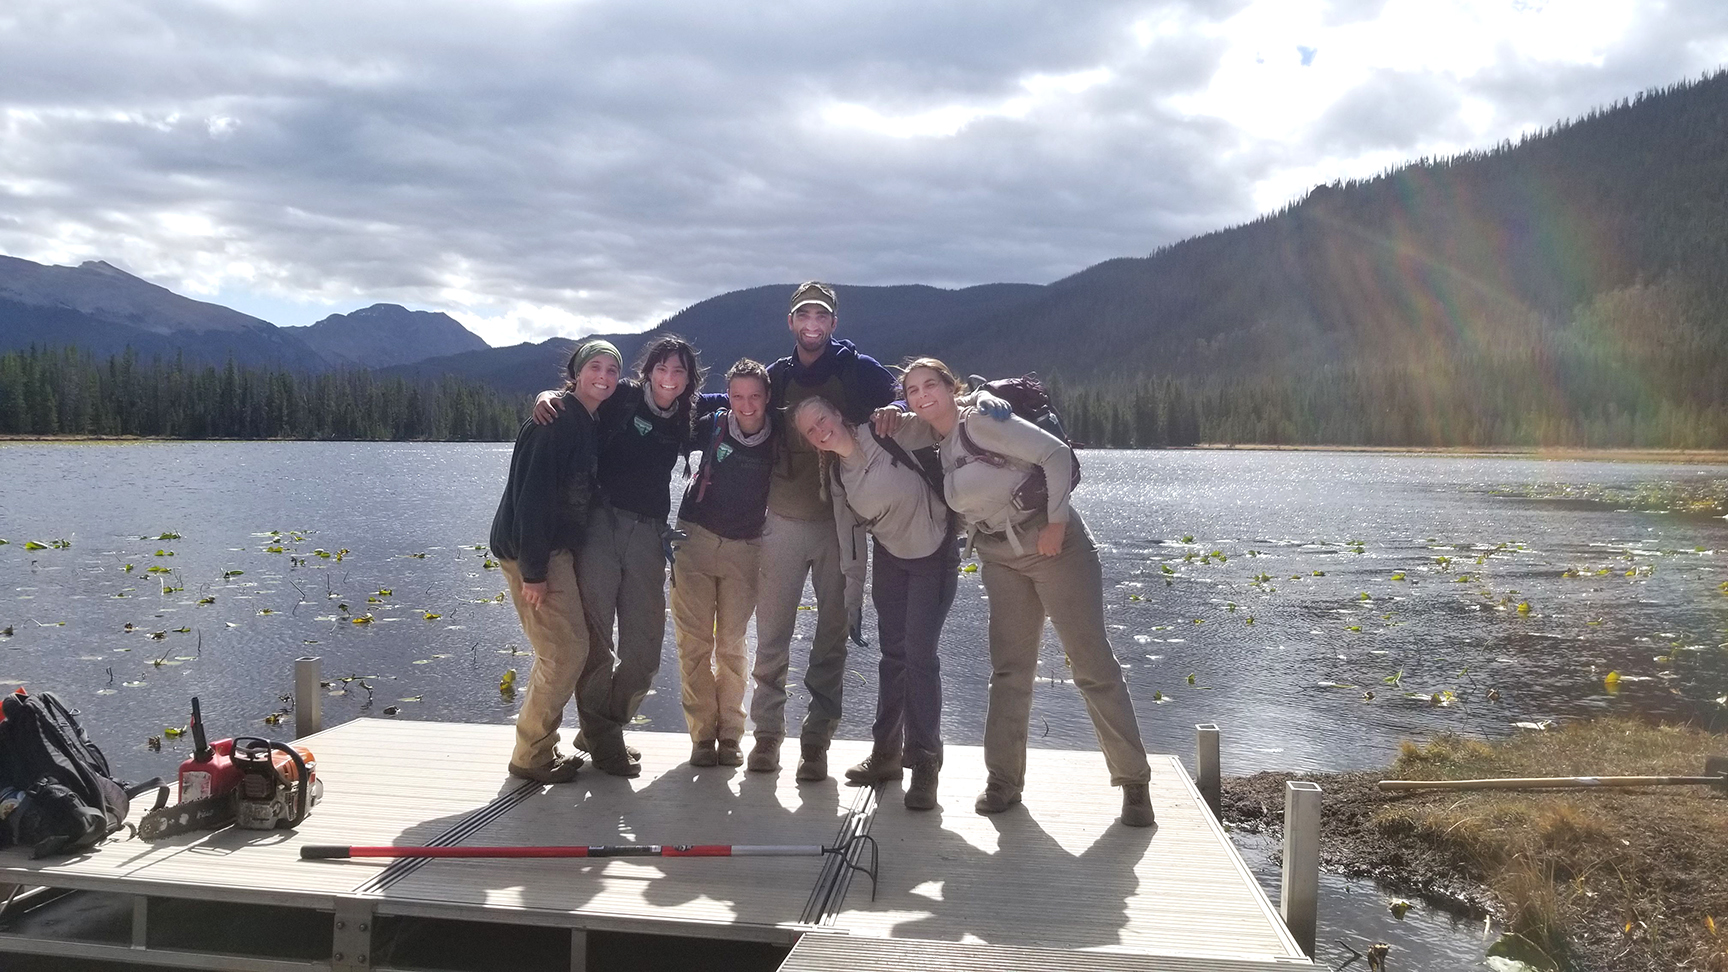 A group of people standing on a dock near a lake.